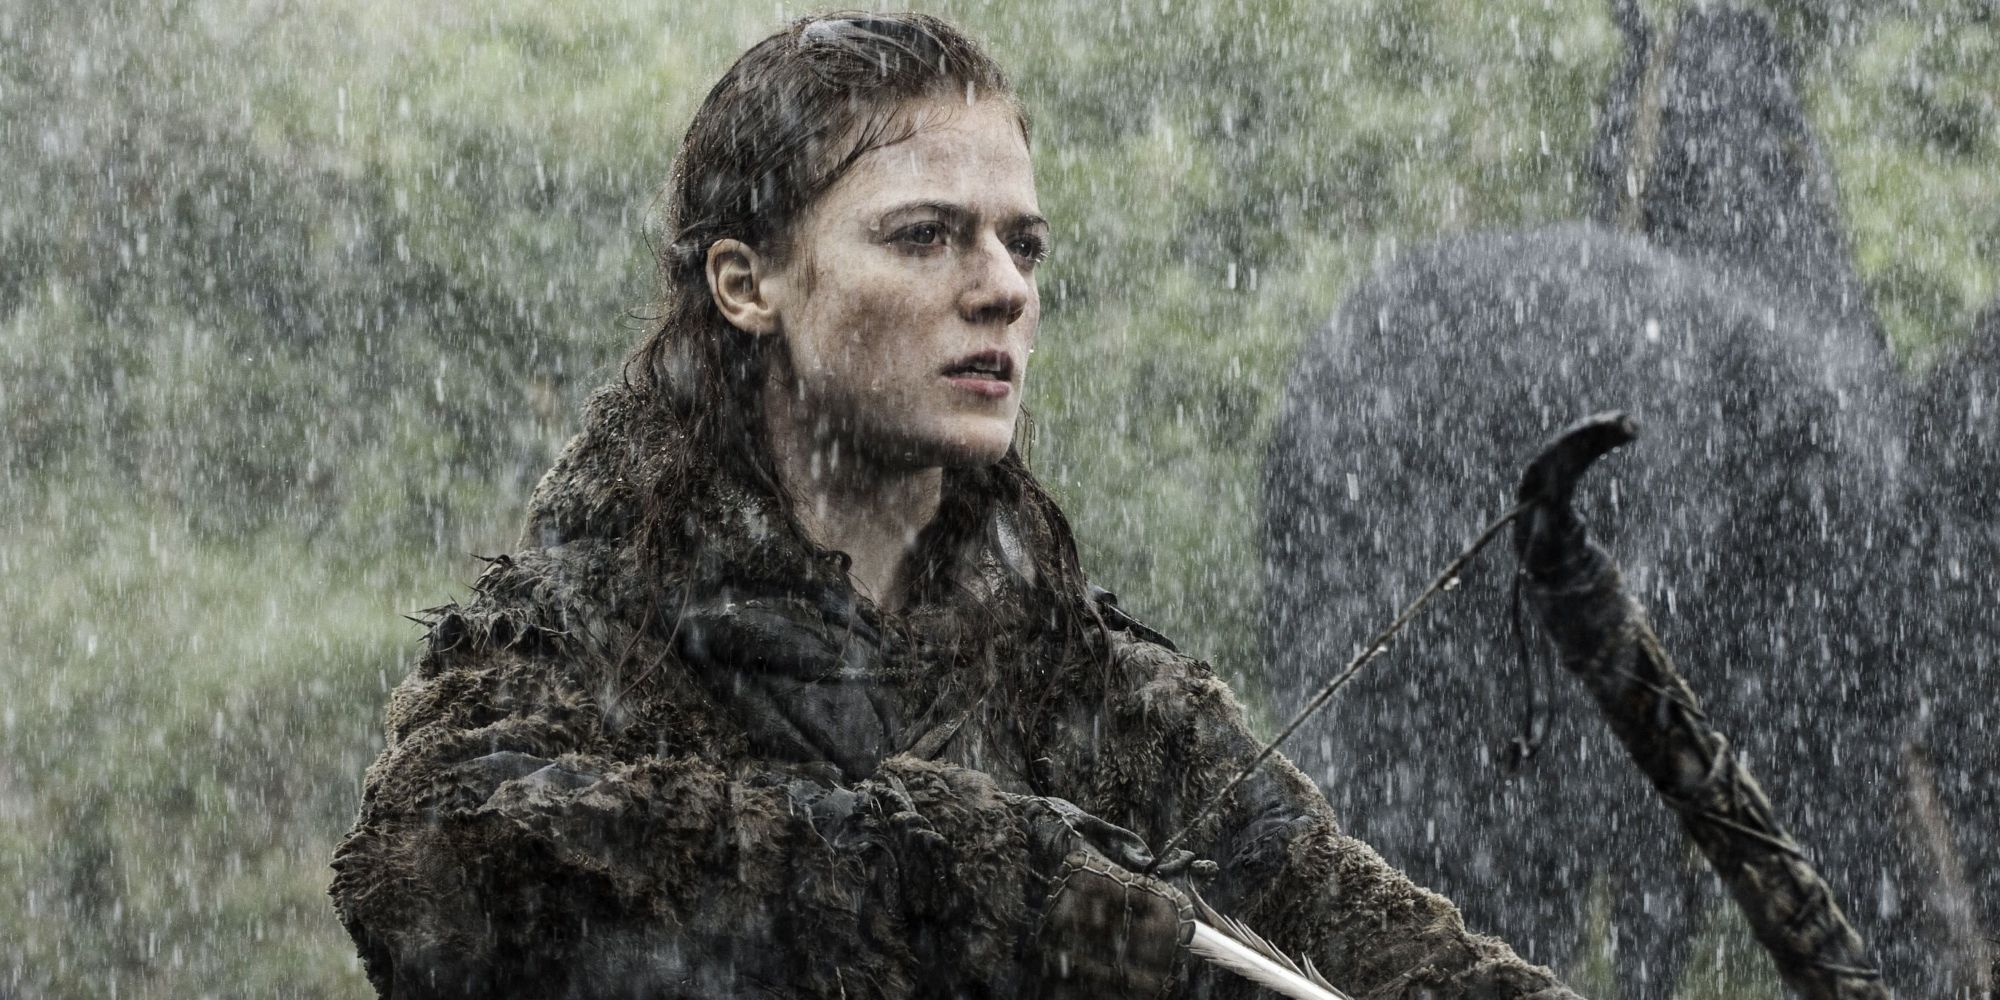 Ygritte in Game of Thrones.